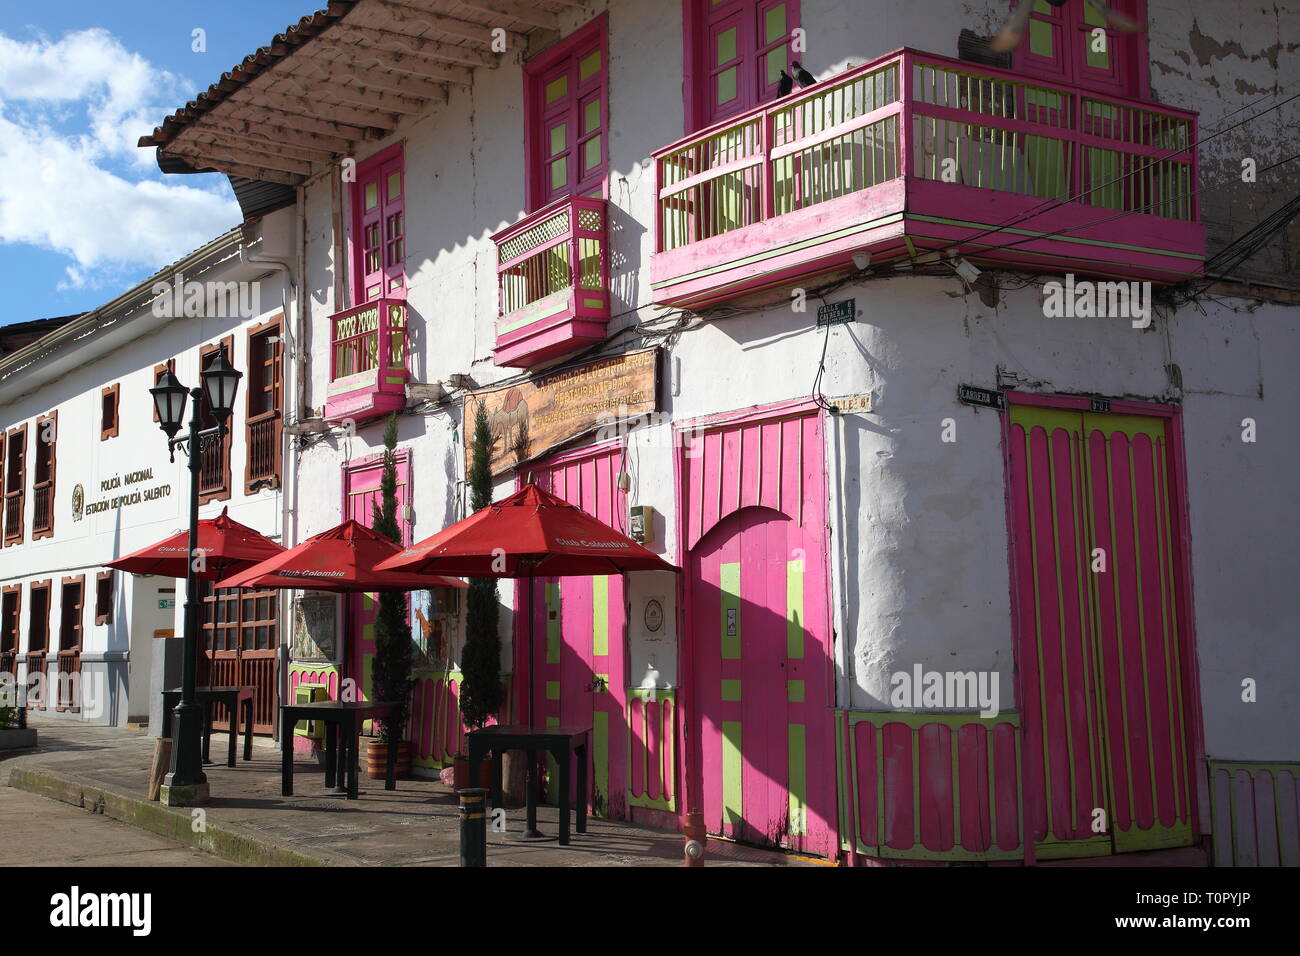 Brightly painted shops, bars and restaurants in the town of Salento in Quindío district of Colombia.Paisa style architecture and built of adobe brick. Stock Photo